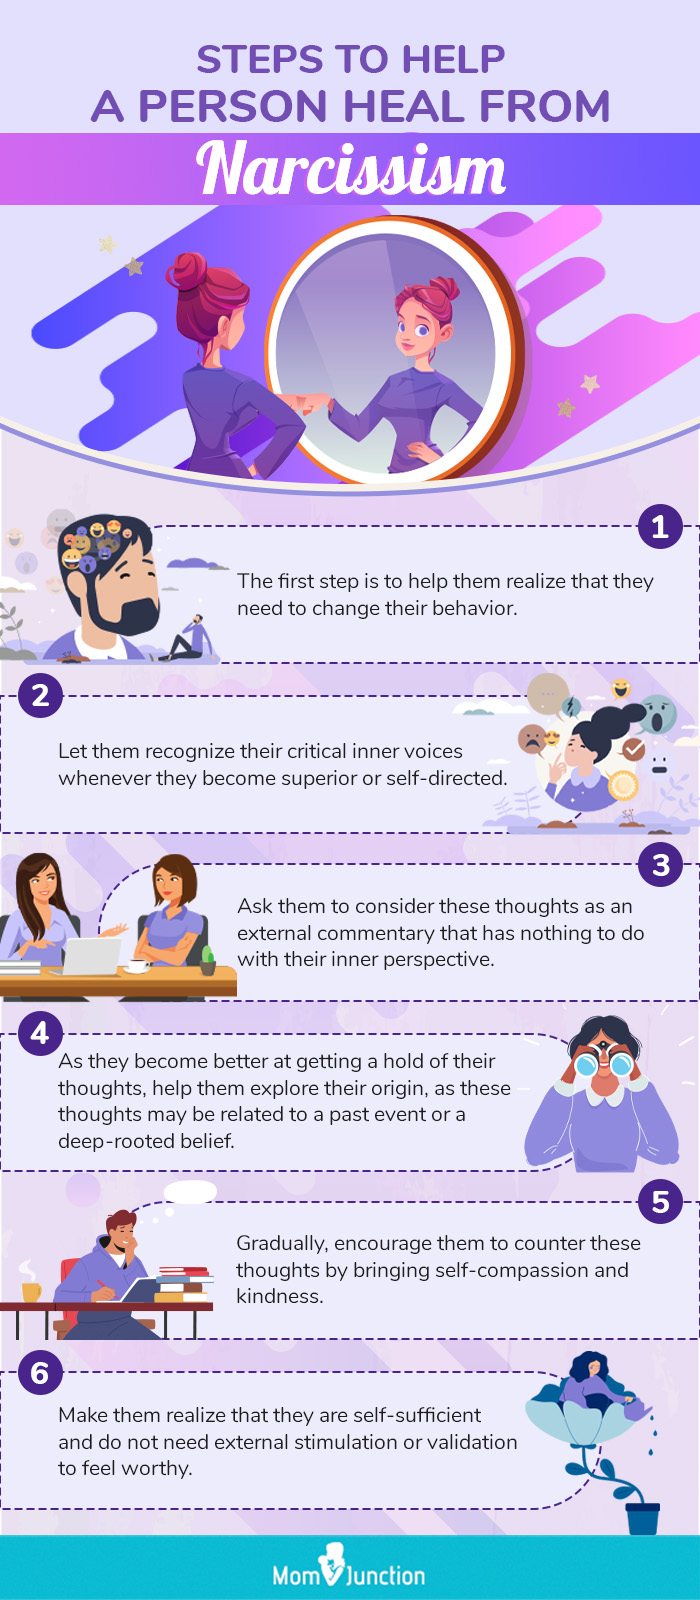 steps to help a narcissistic person [infographic]